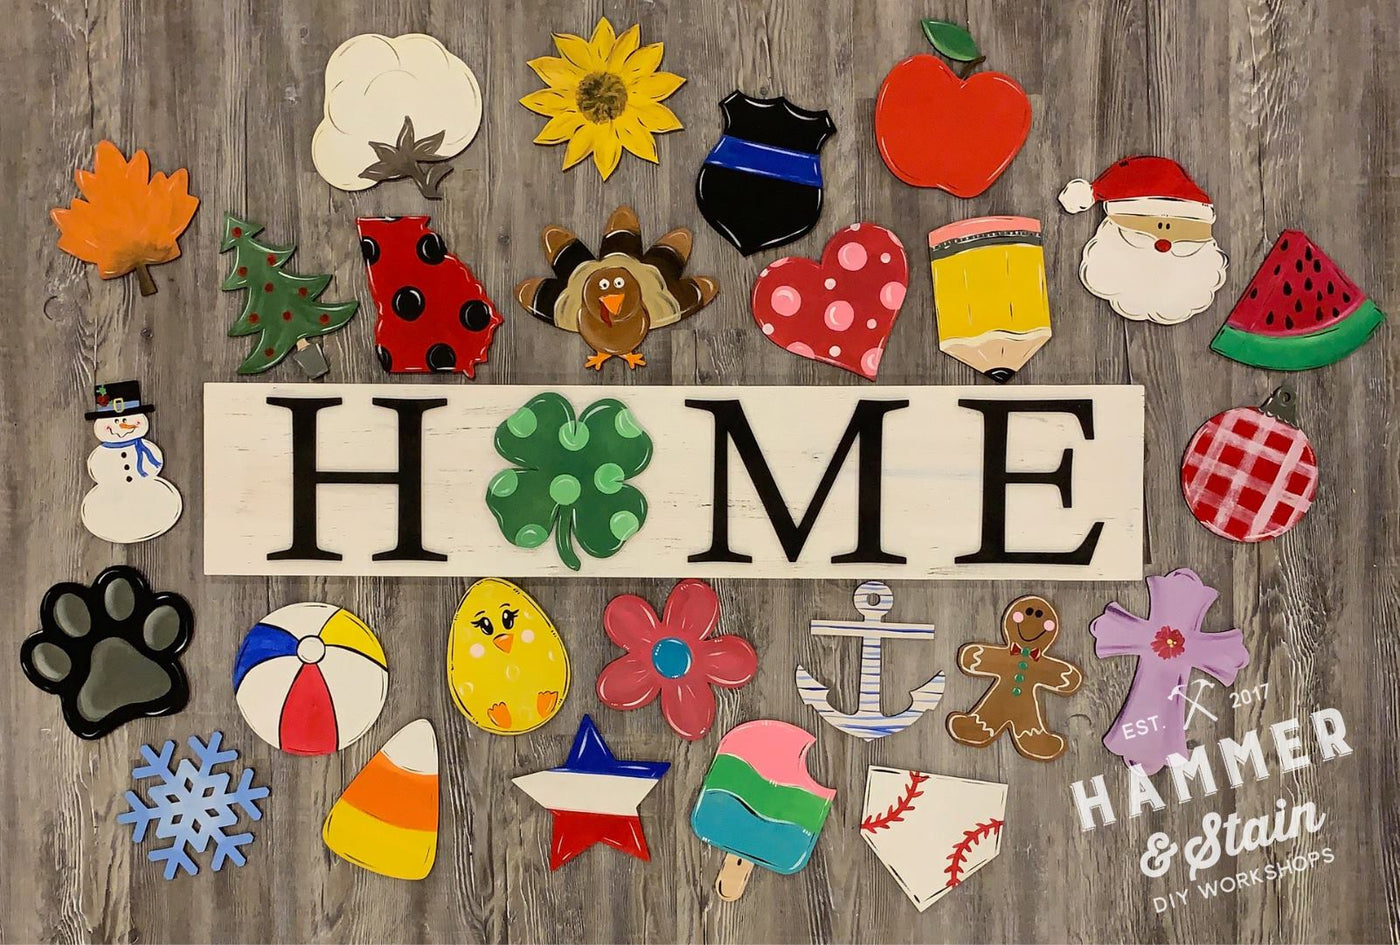 Interchangeable Home  or Welcome sign